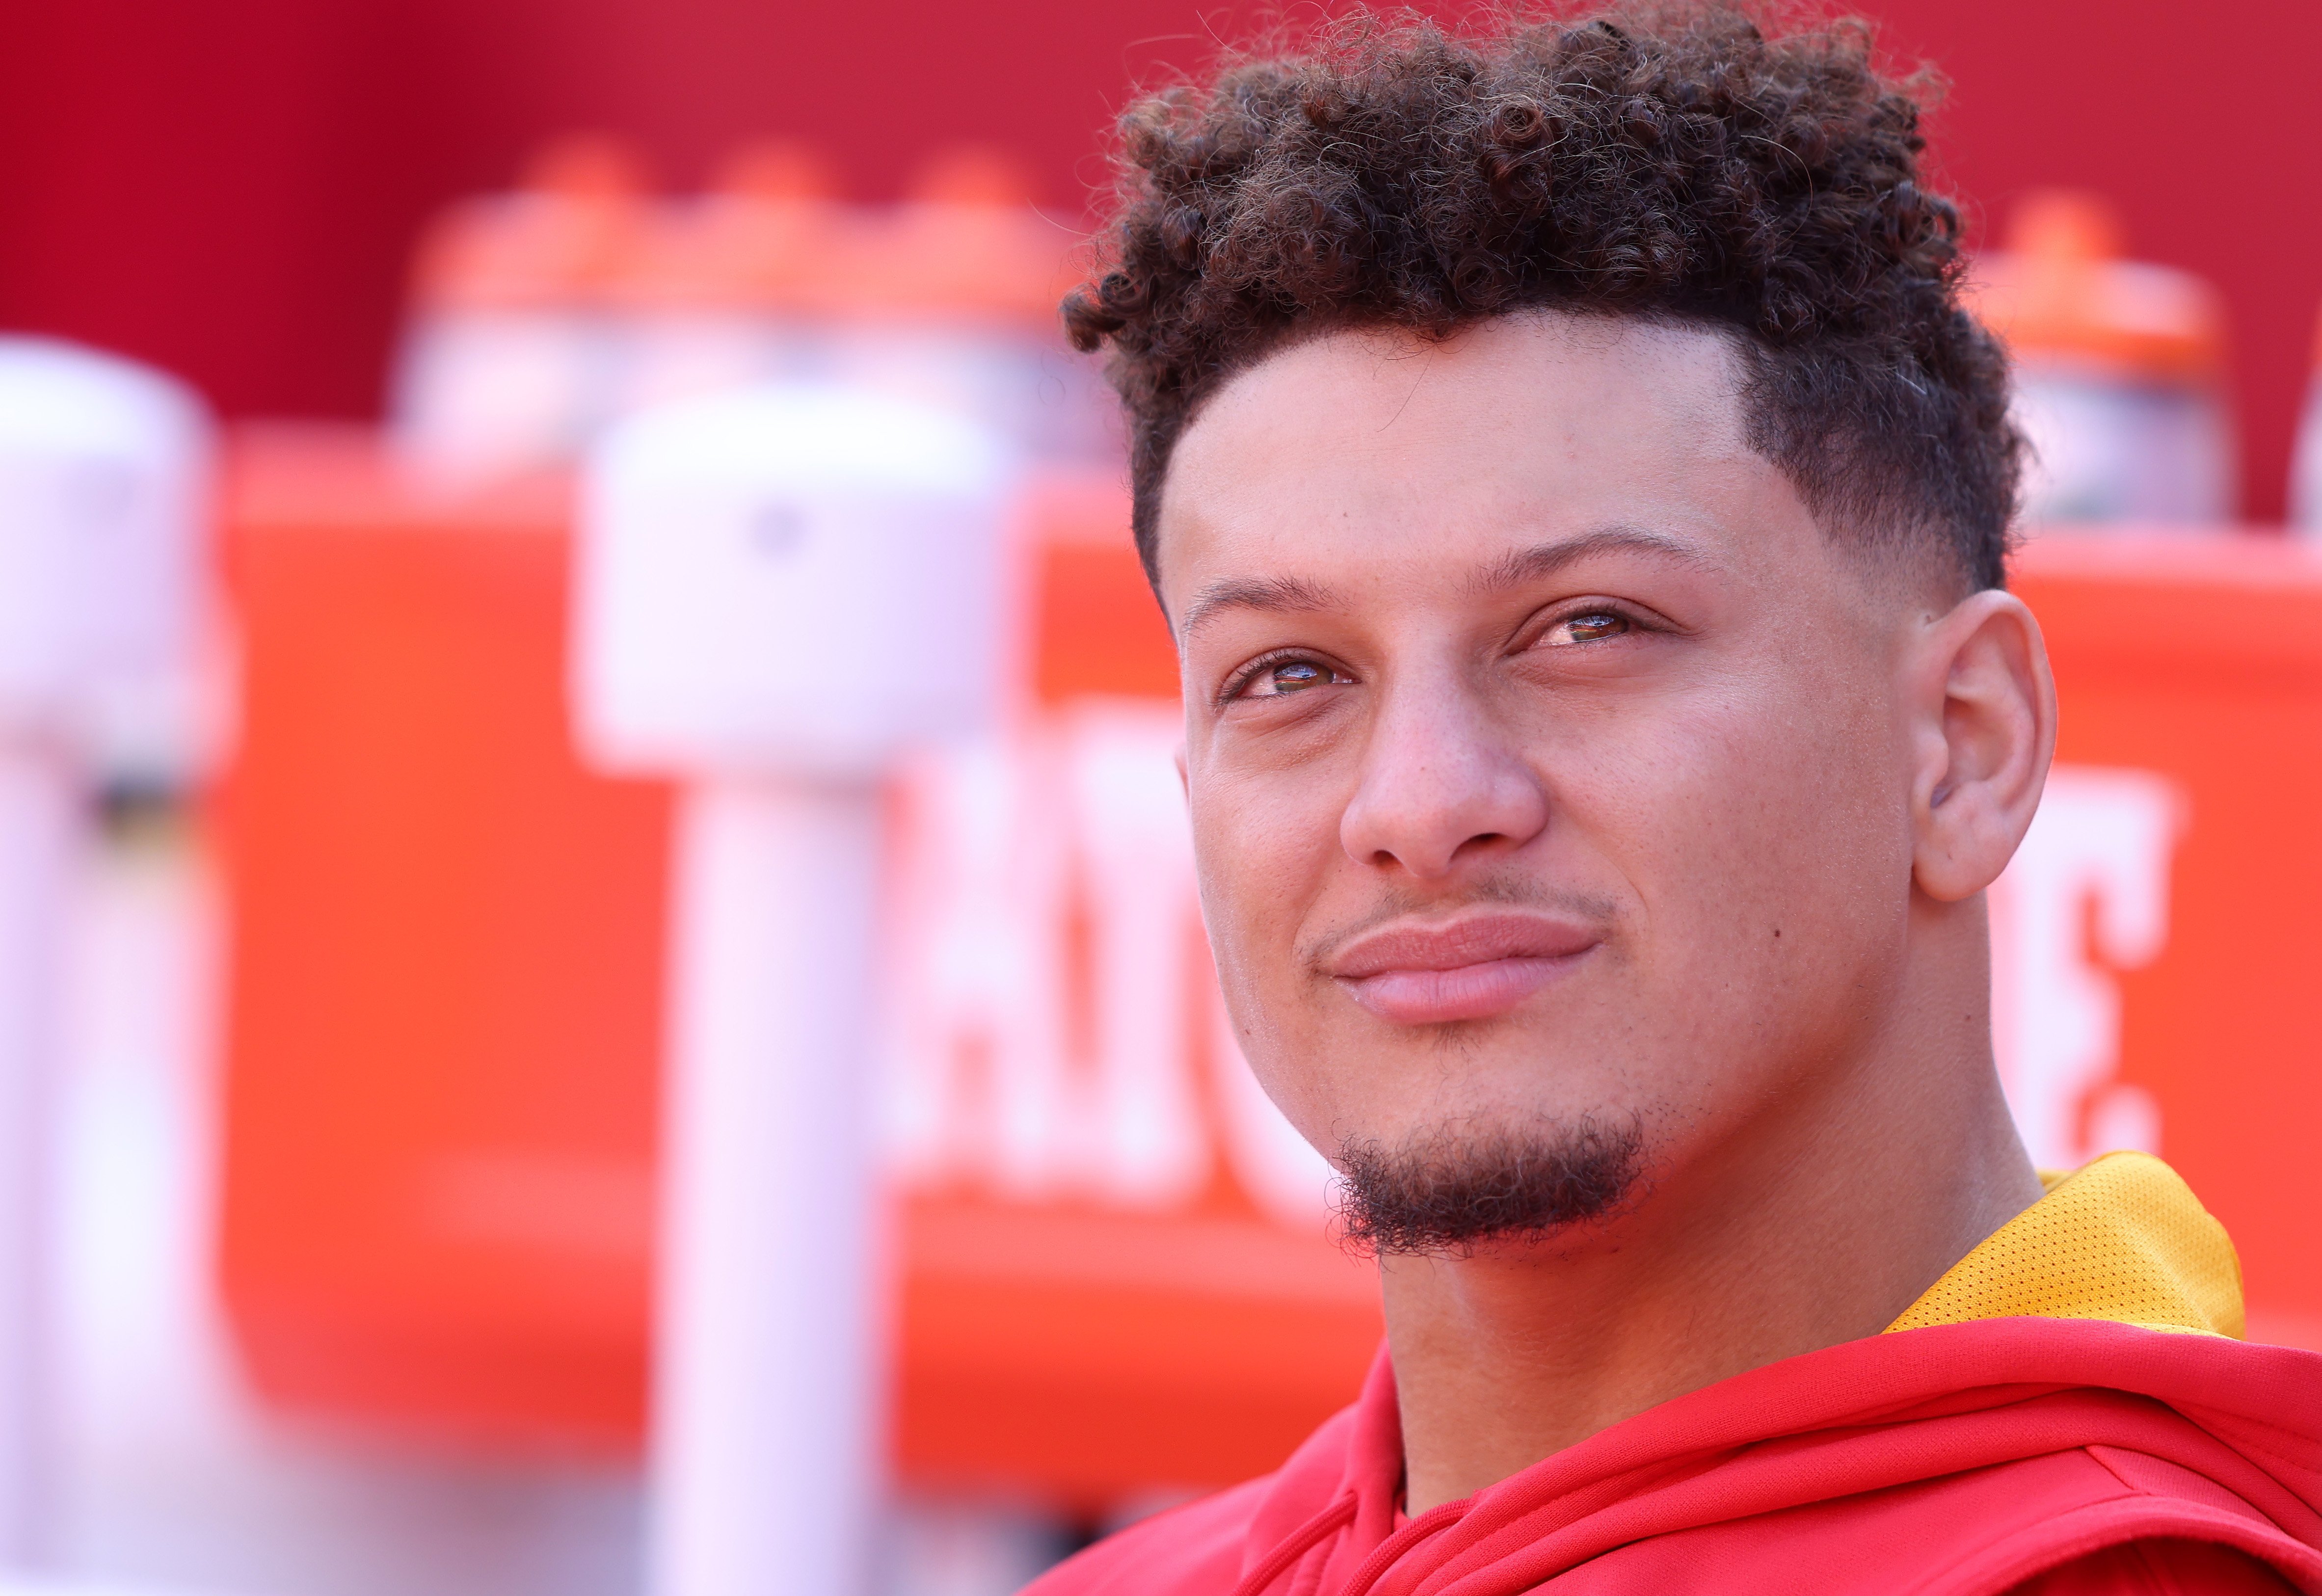 Patrick Mahomes on the field before the game against the Green Bay Packers